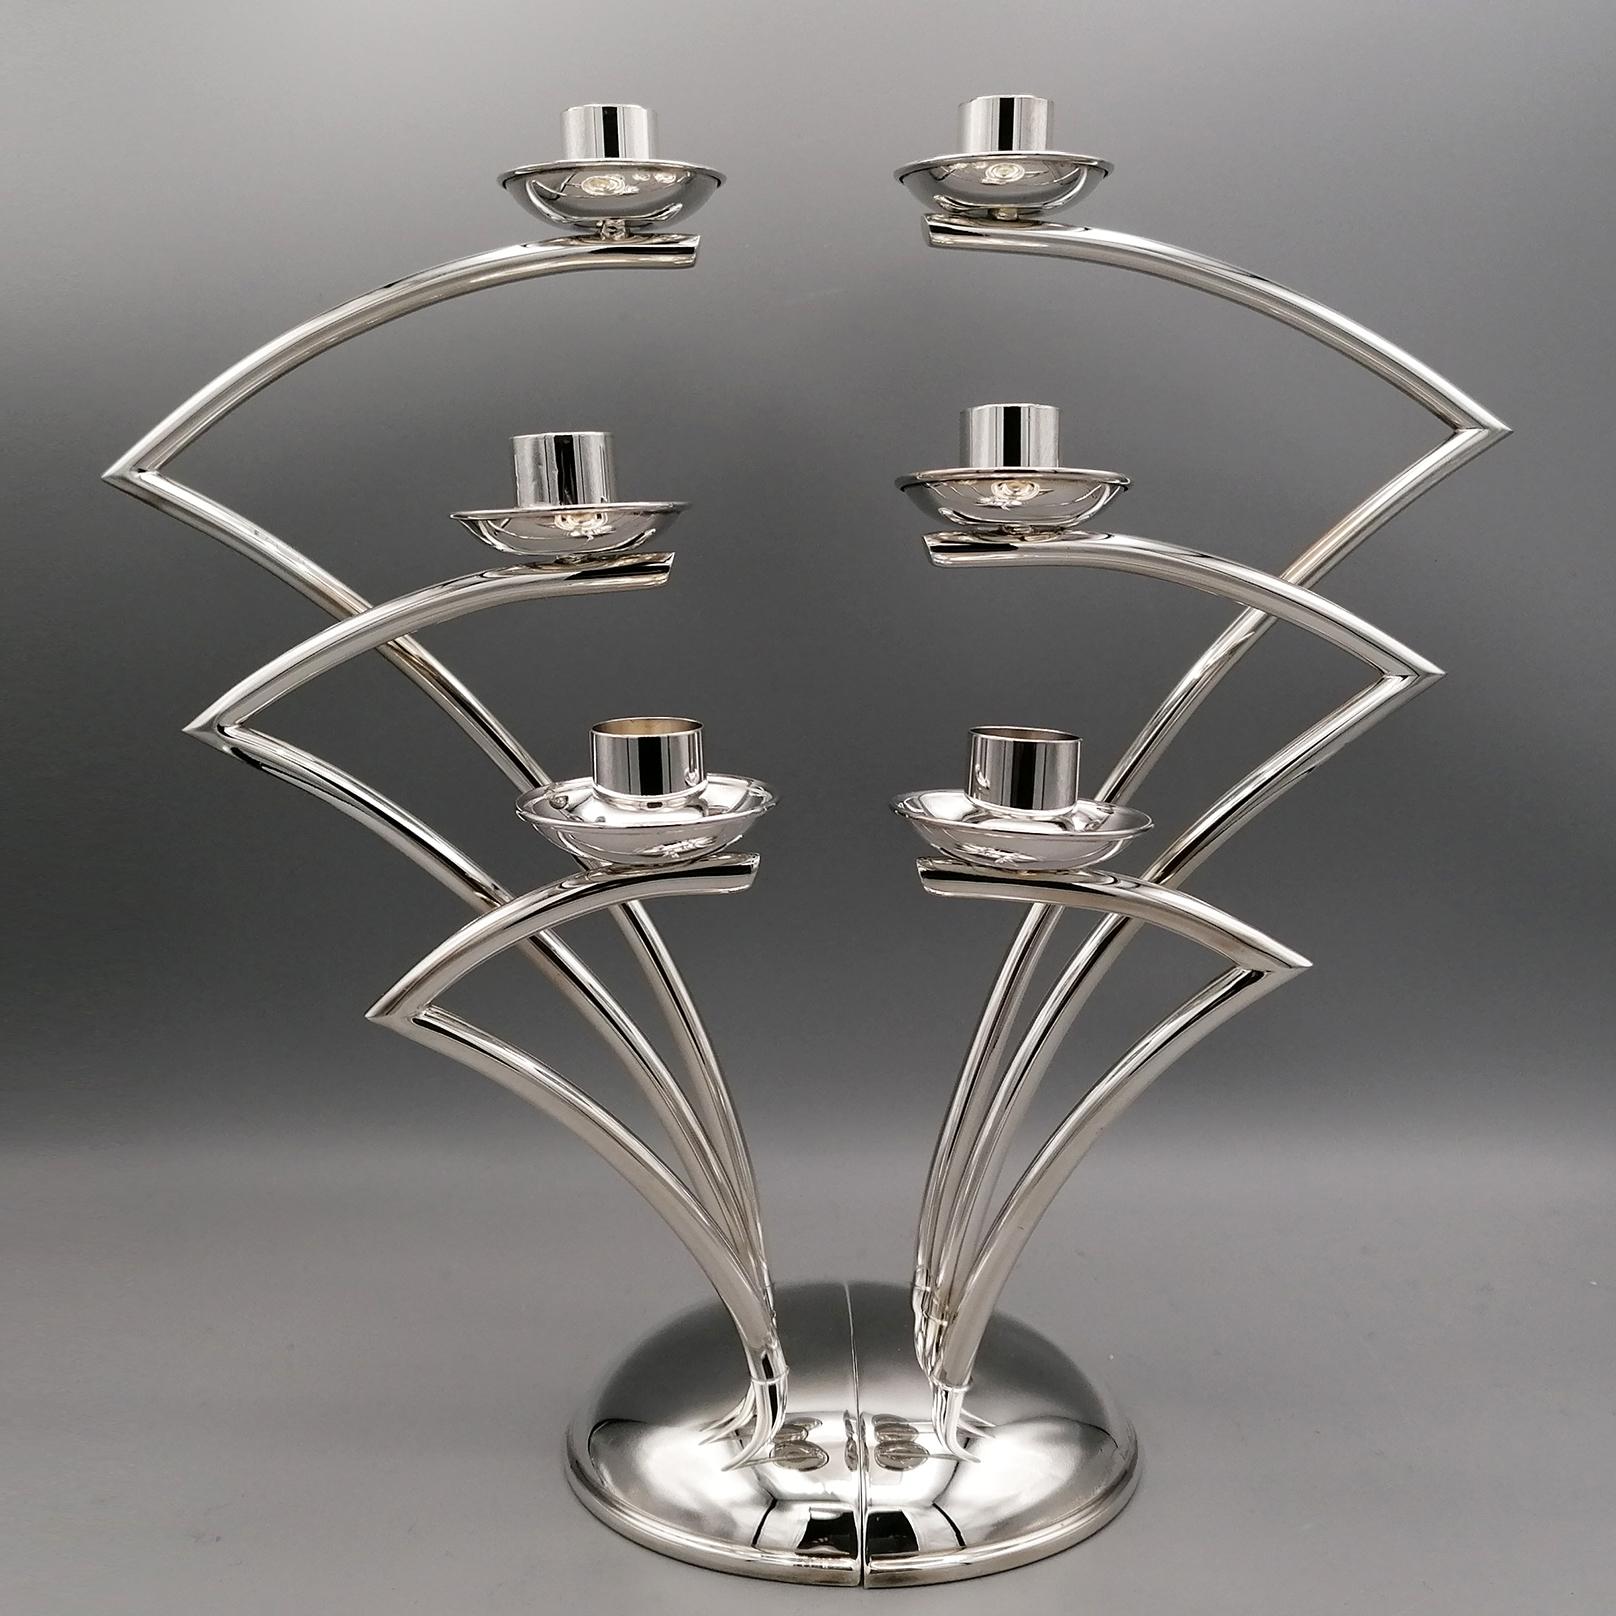 Candelabra in modern and minimal style with 6 flames, divisible into 2 pieces of 3 flames.
This particular construction system is multipurpose because it allows the candelabra can be combined with six lights to be positioned in the center of the